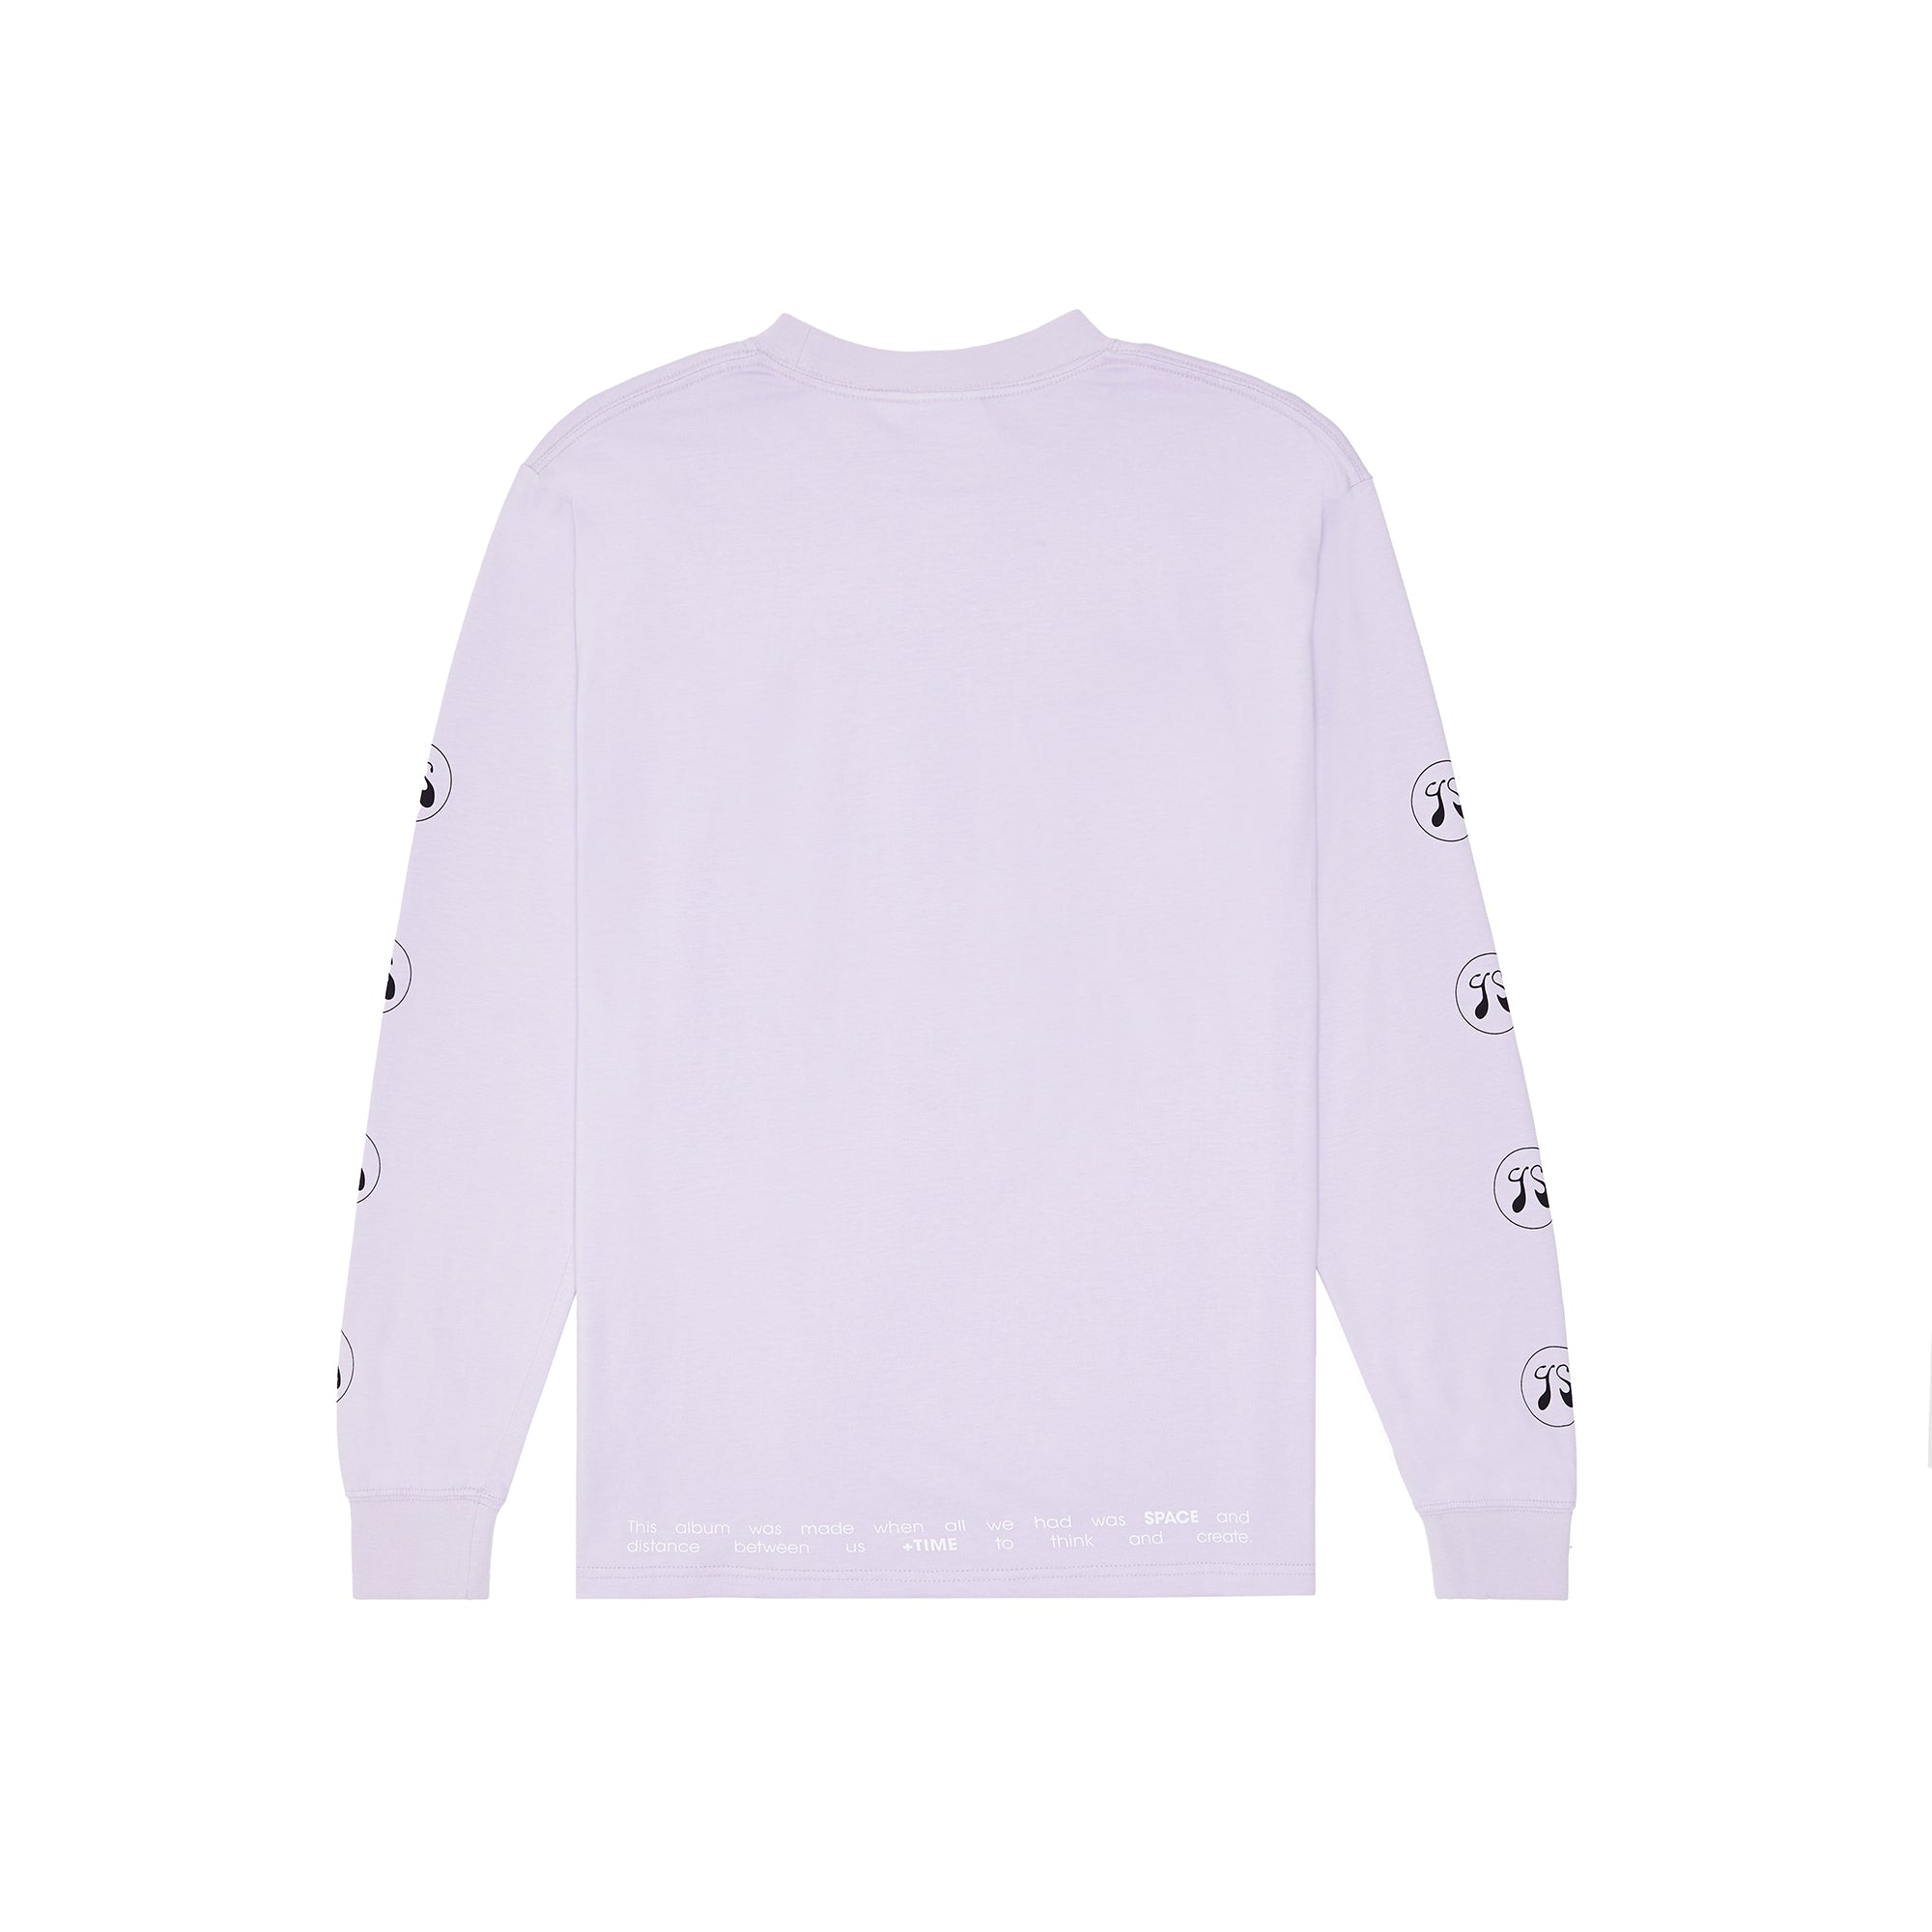 Space + Time Long Sleeve